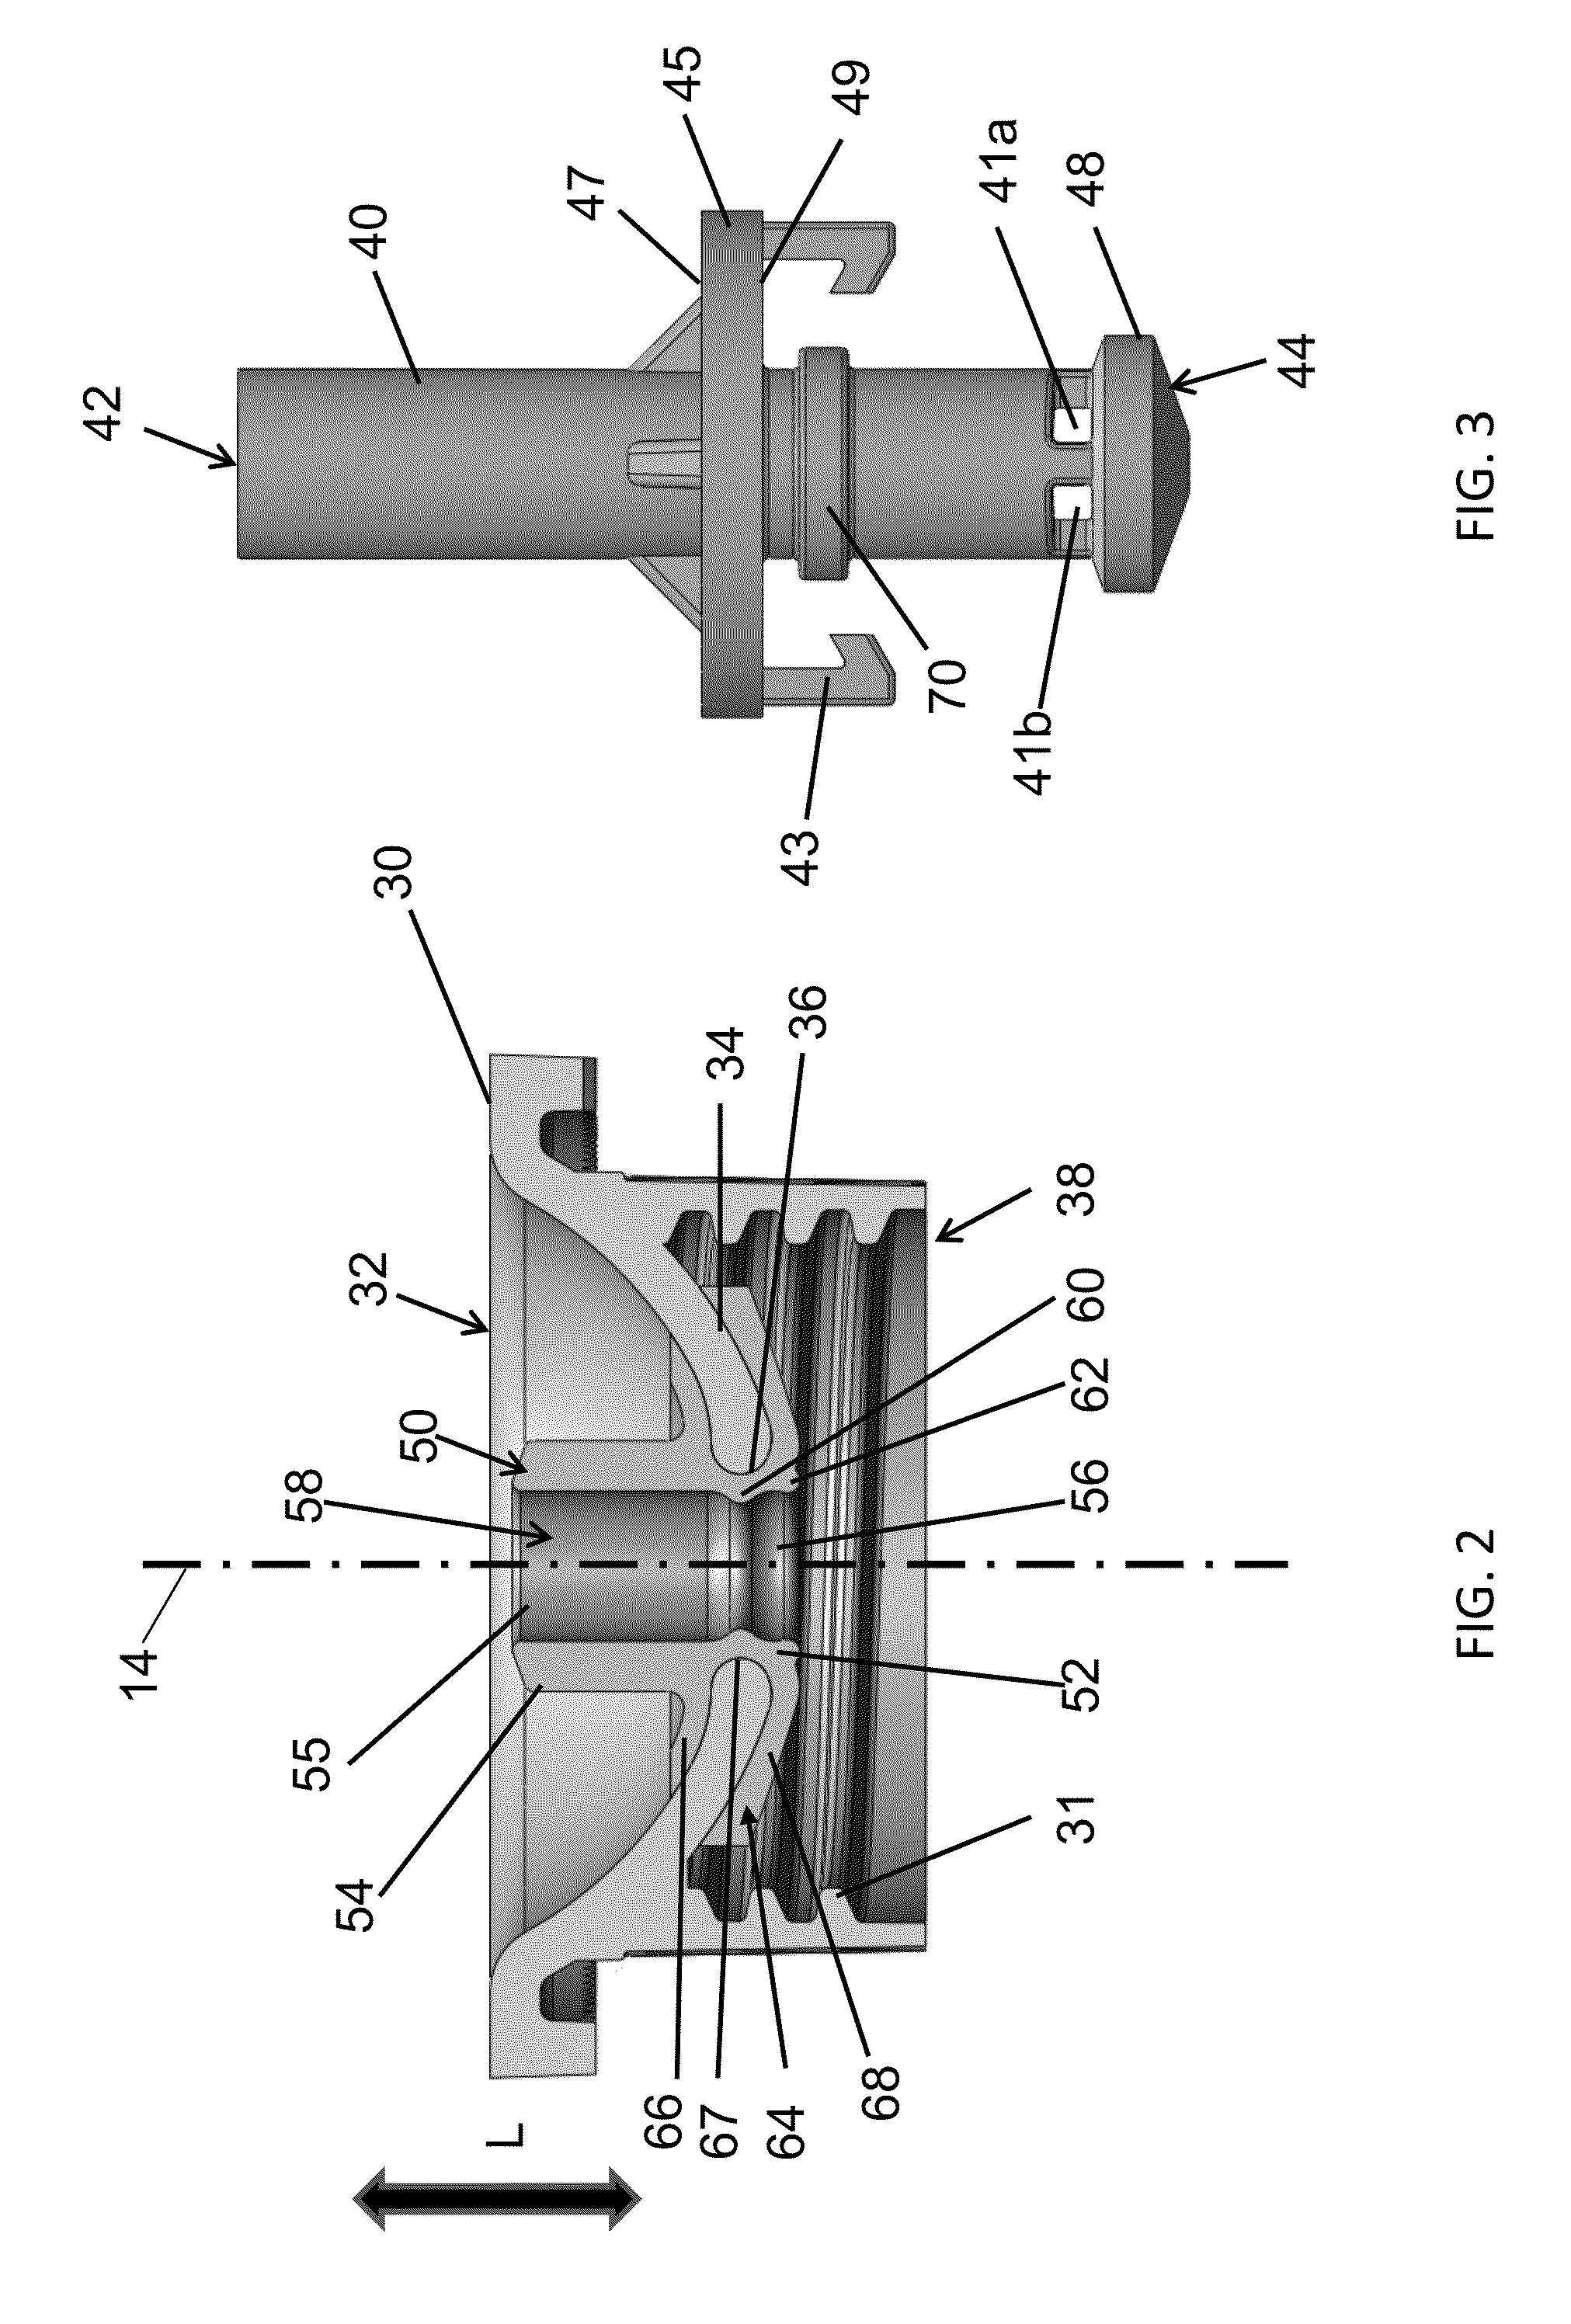 Compressible valve for a pressurized container